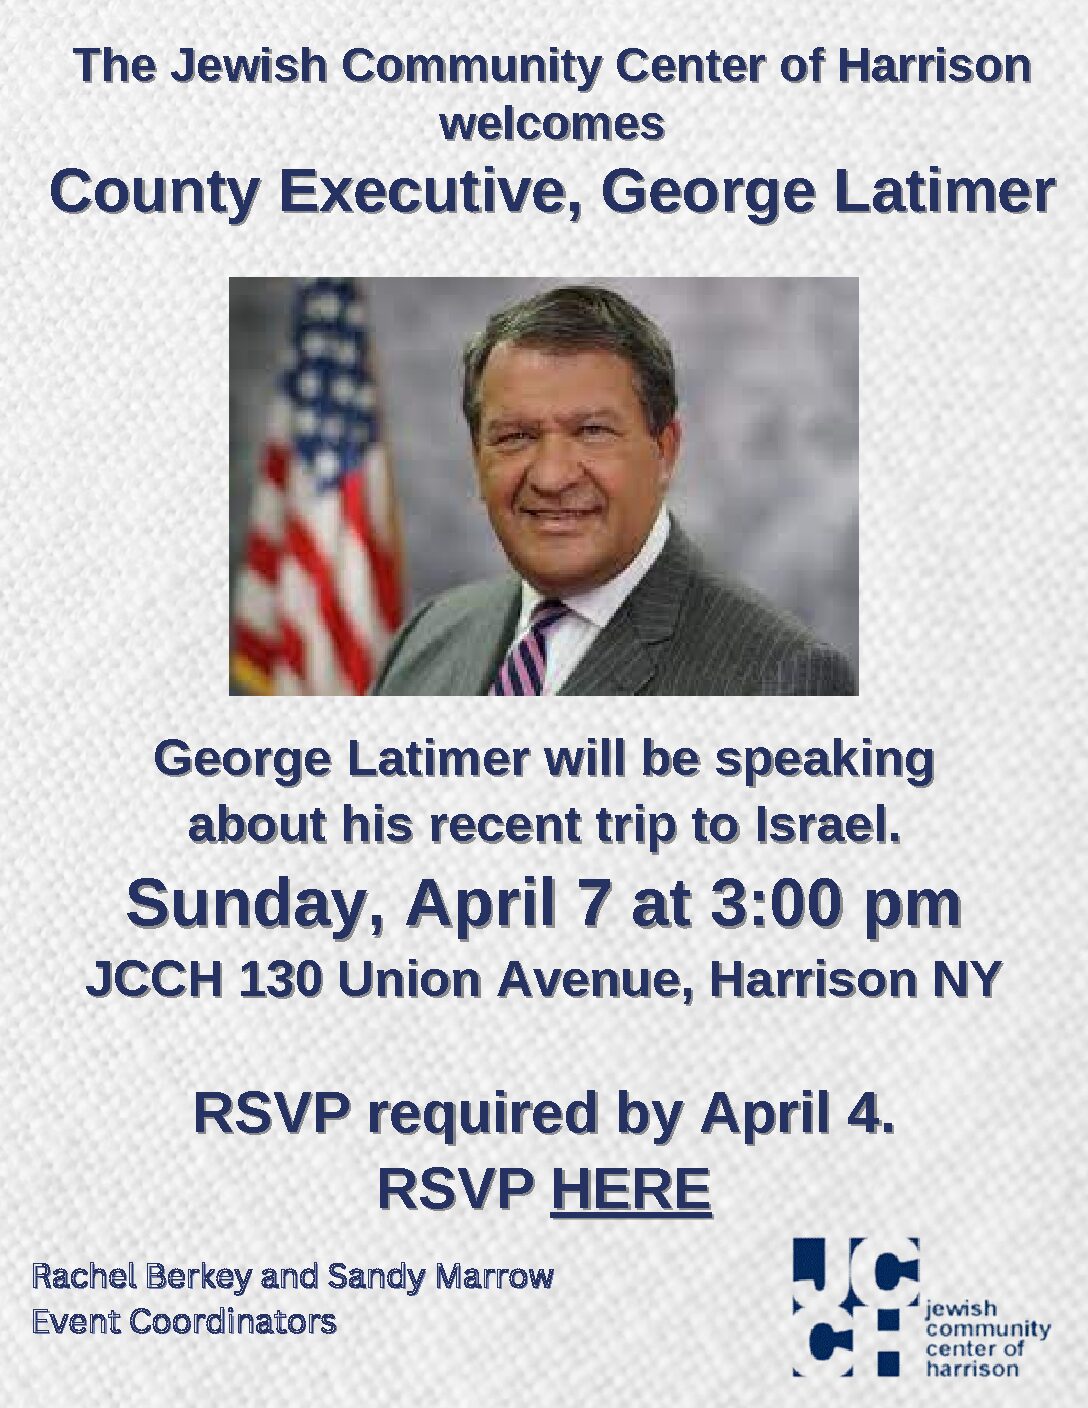 The Jewish Community Center of Harrison welcomes County Executive, George Latimer